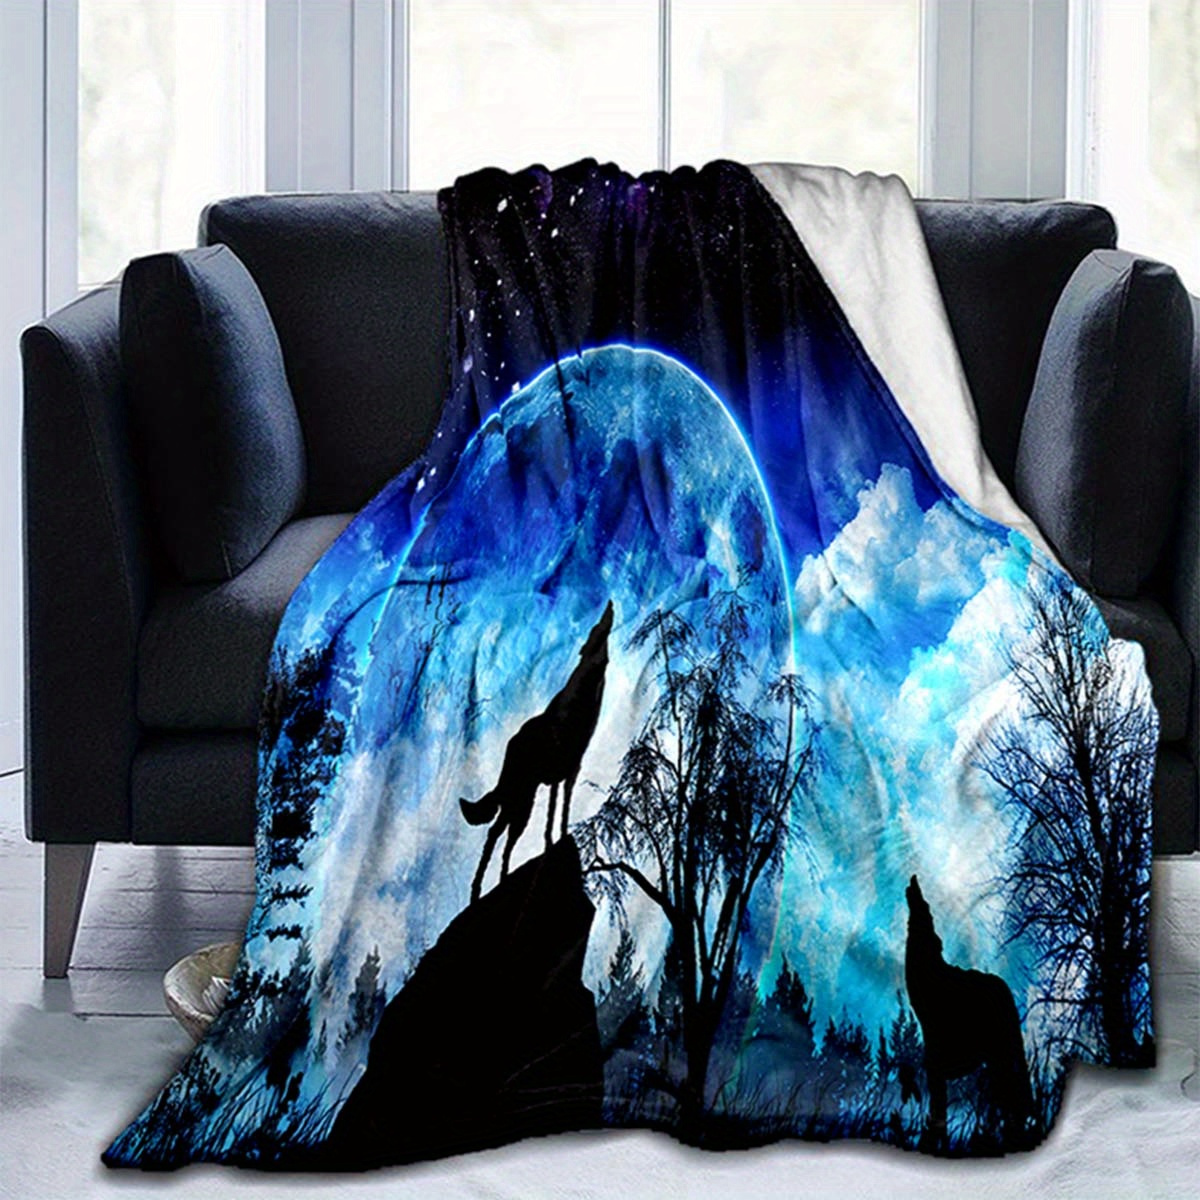 

3d Wolf Soft Flannel Throw Blanket For Living Room Bedroom Bed Sofa Picnic Cover Decor Napping Couch Chair Cover